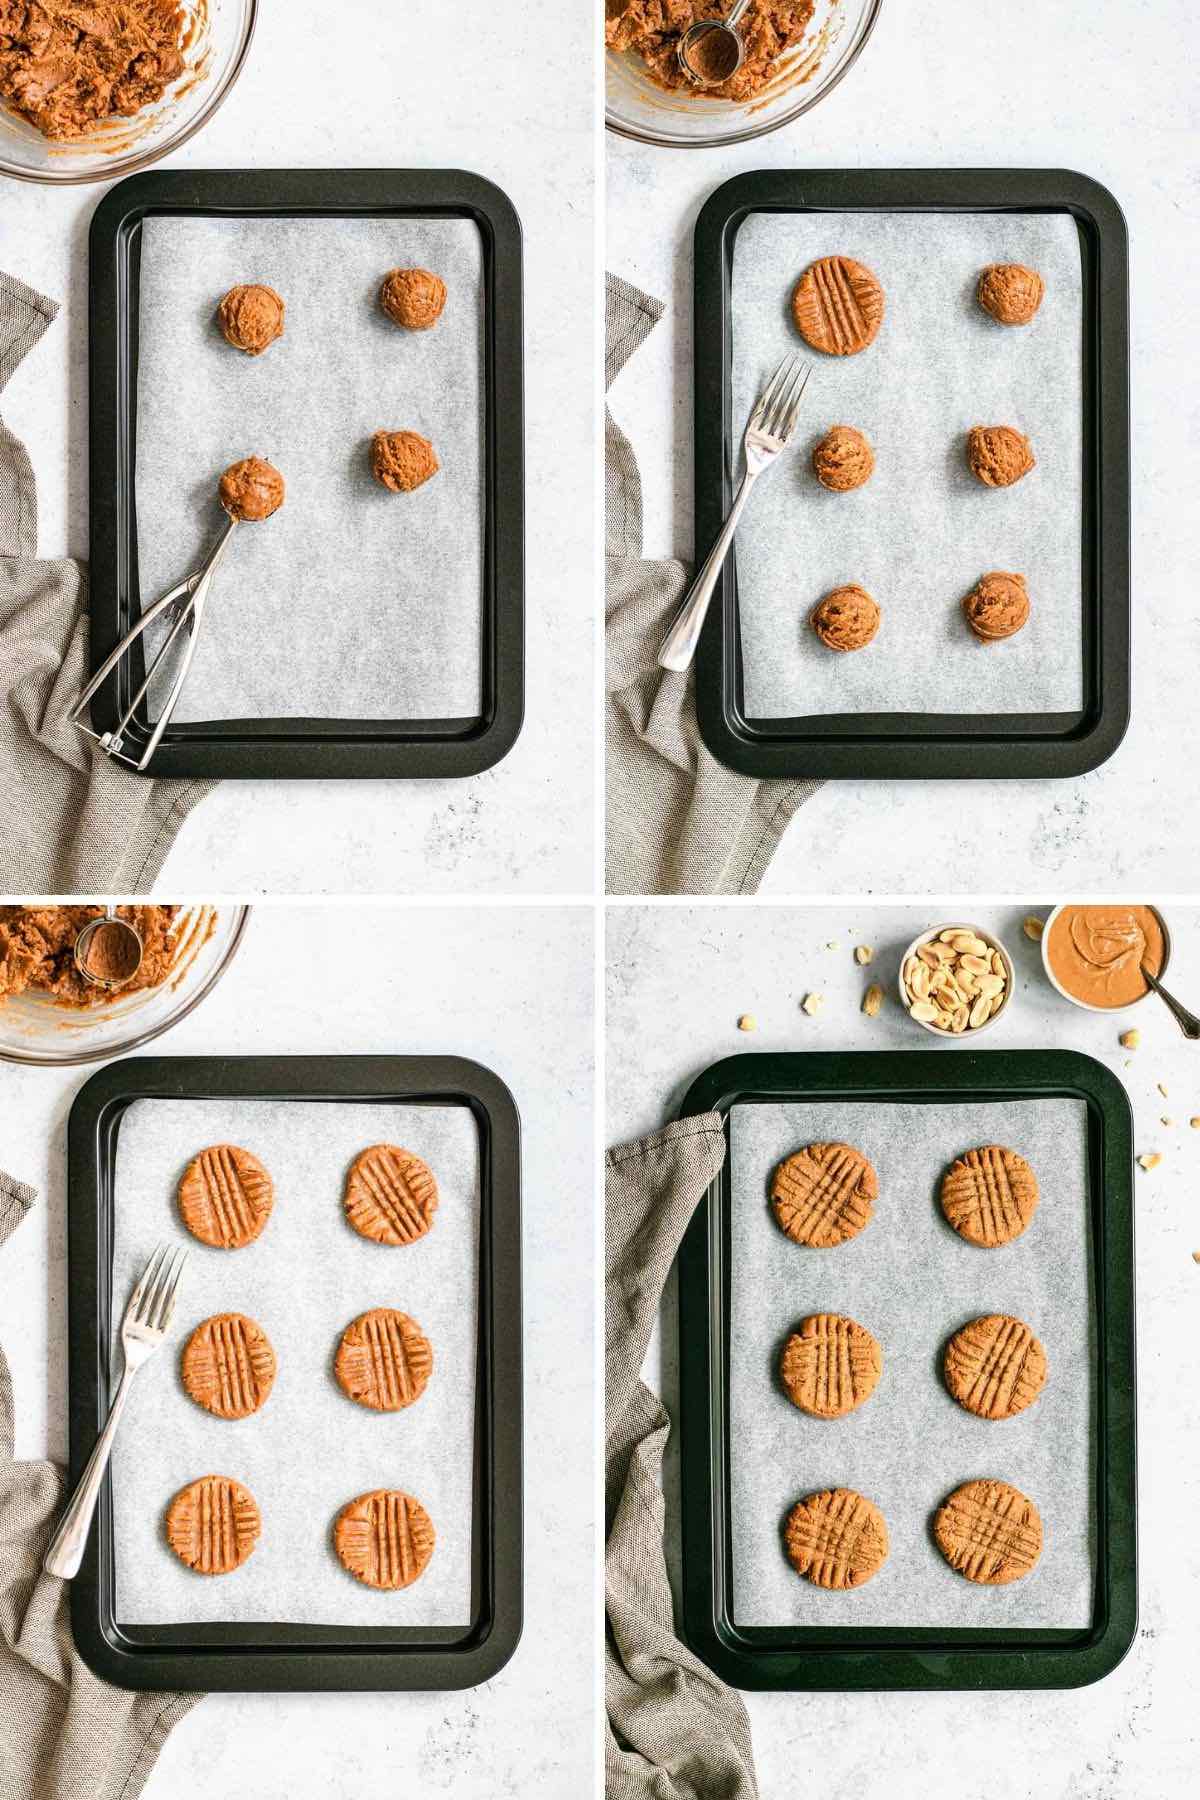 Flourless Peanut Butter Cookies on baking sheet with parchment